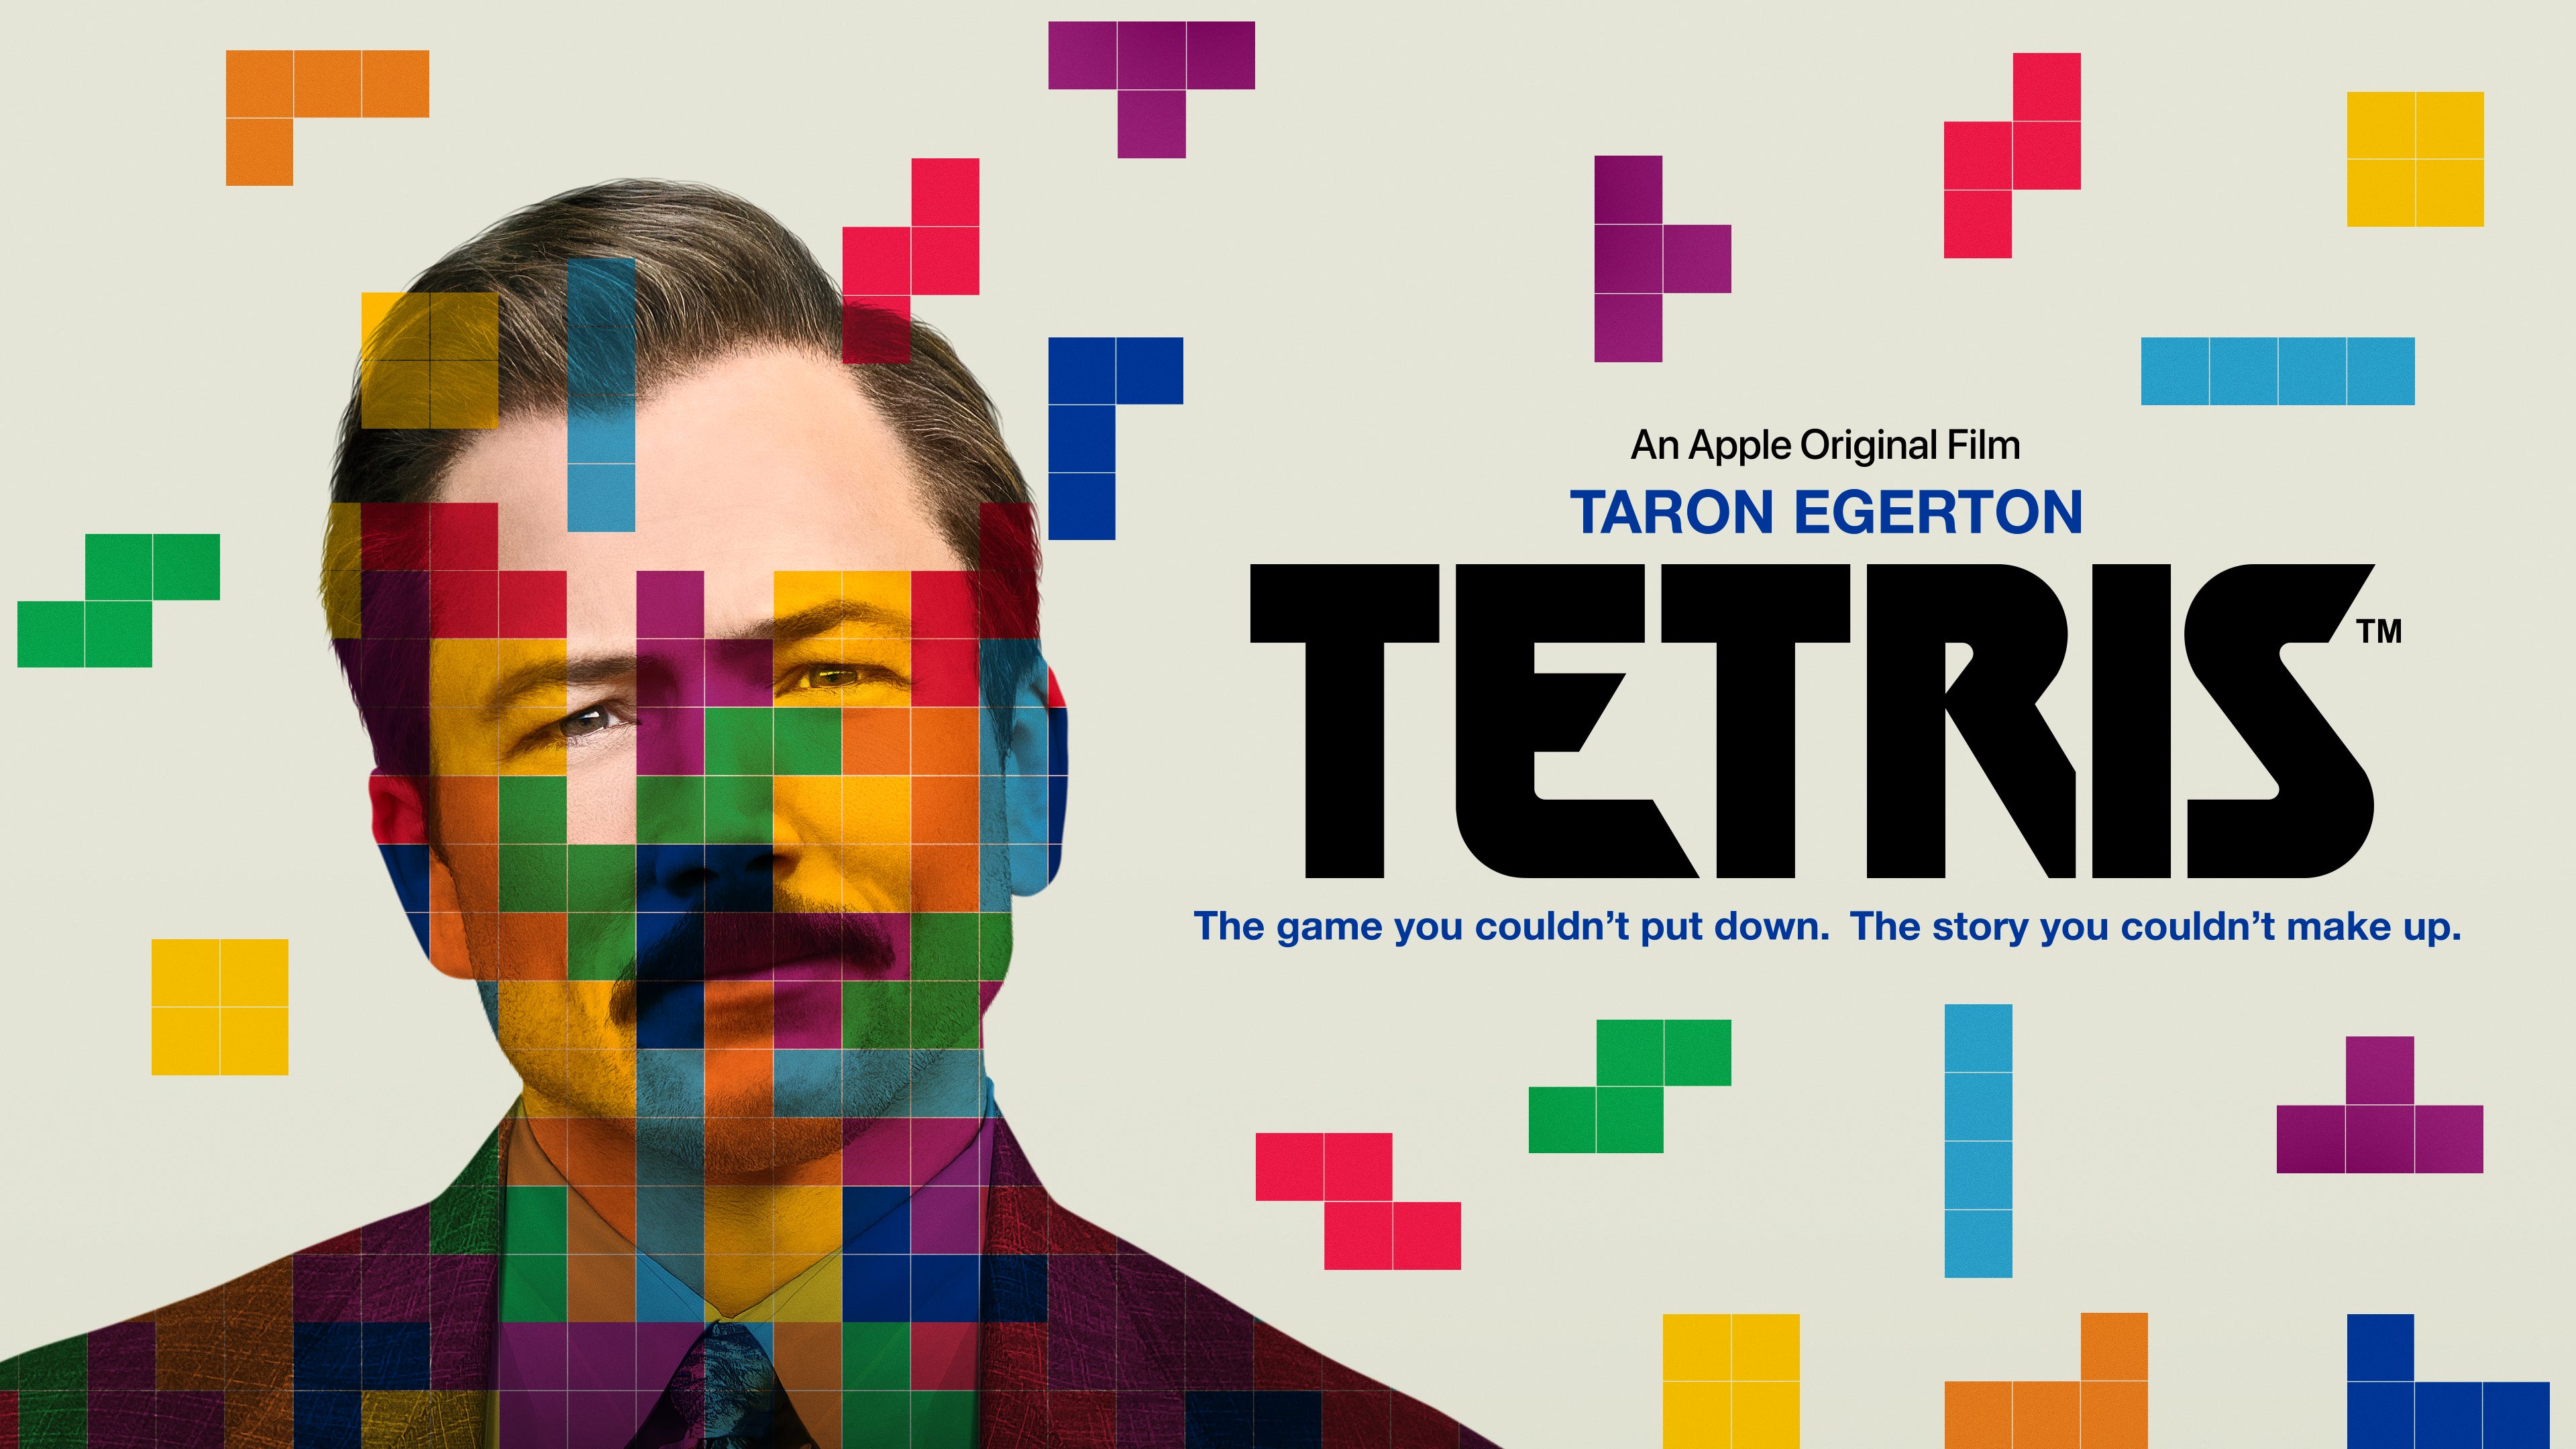 Tetris, from Apple TV+, is the kind of movie we need right now